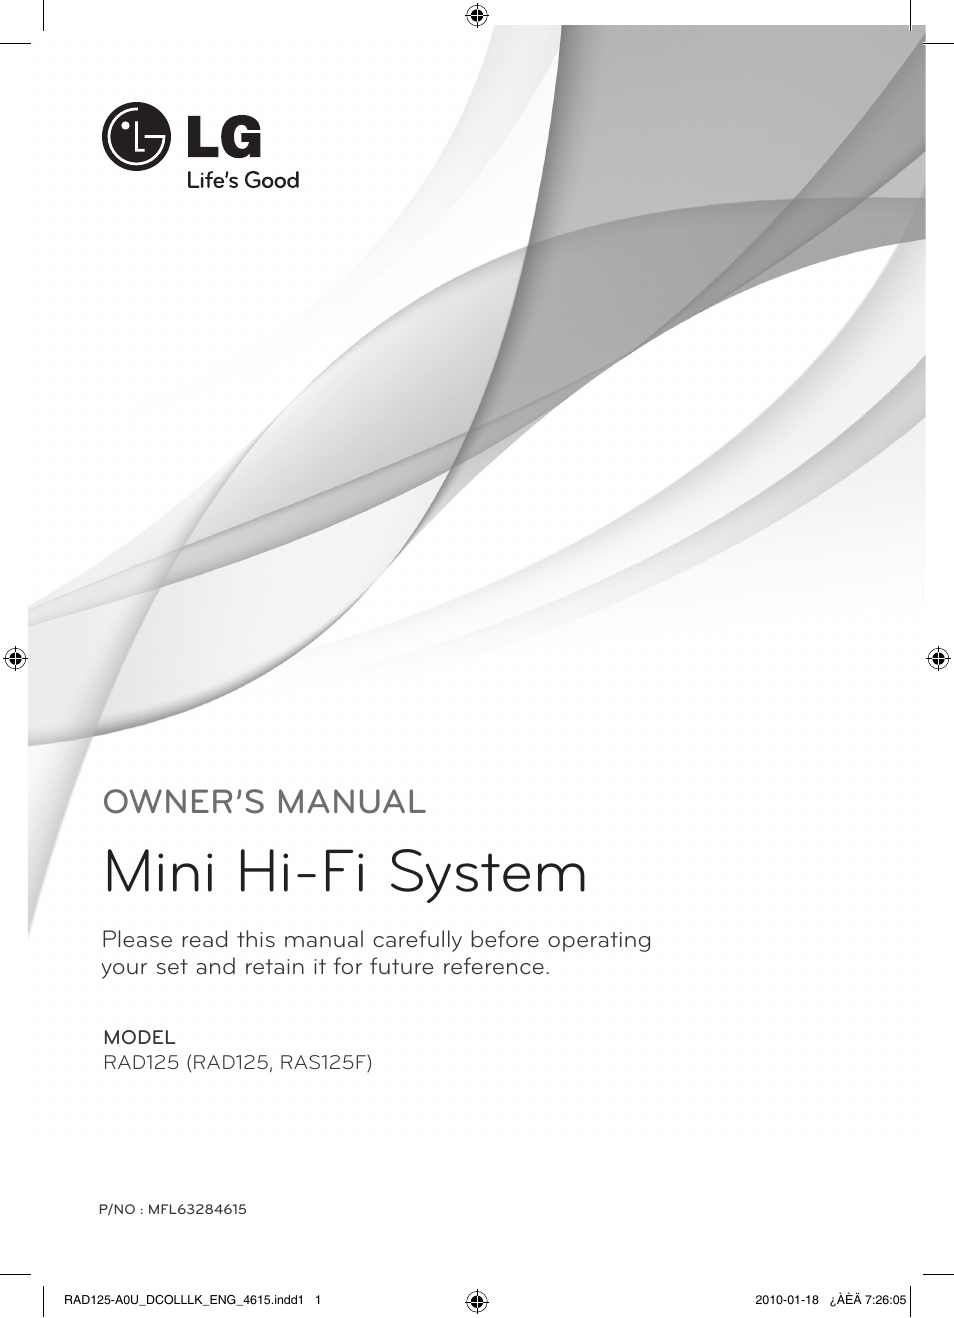 LG RAS125F User Manual | 23 pages